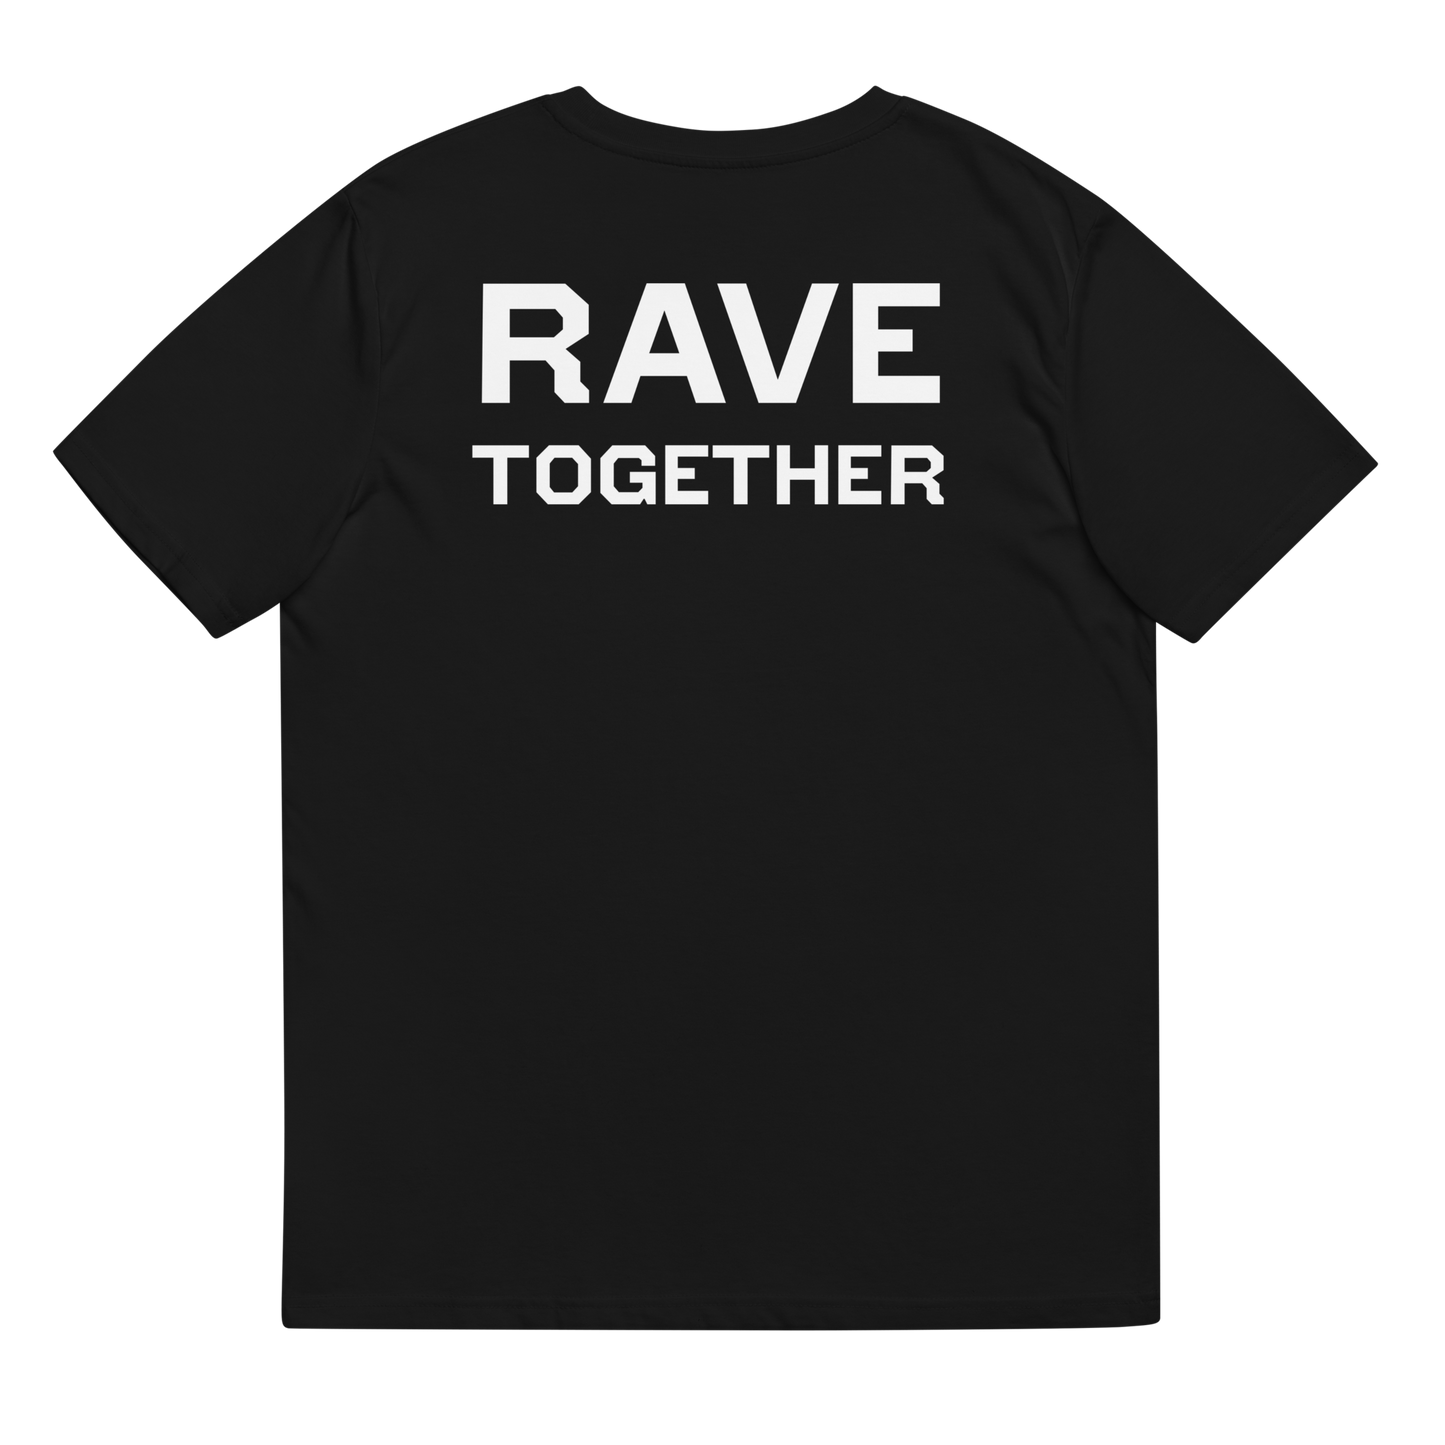 Rave Together Stay Together - T-shirts